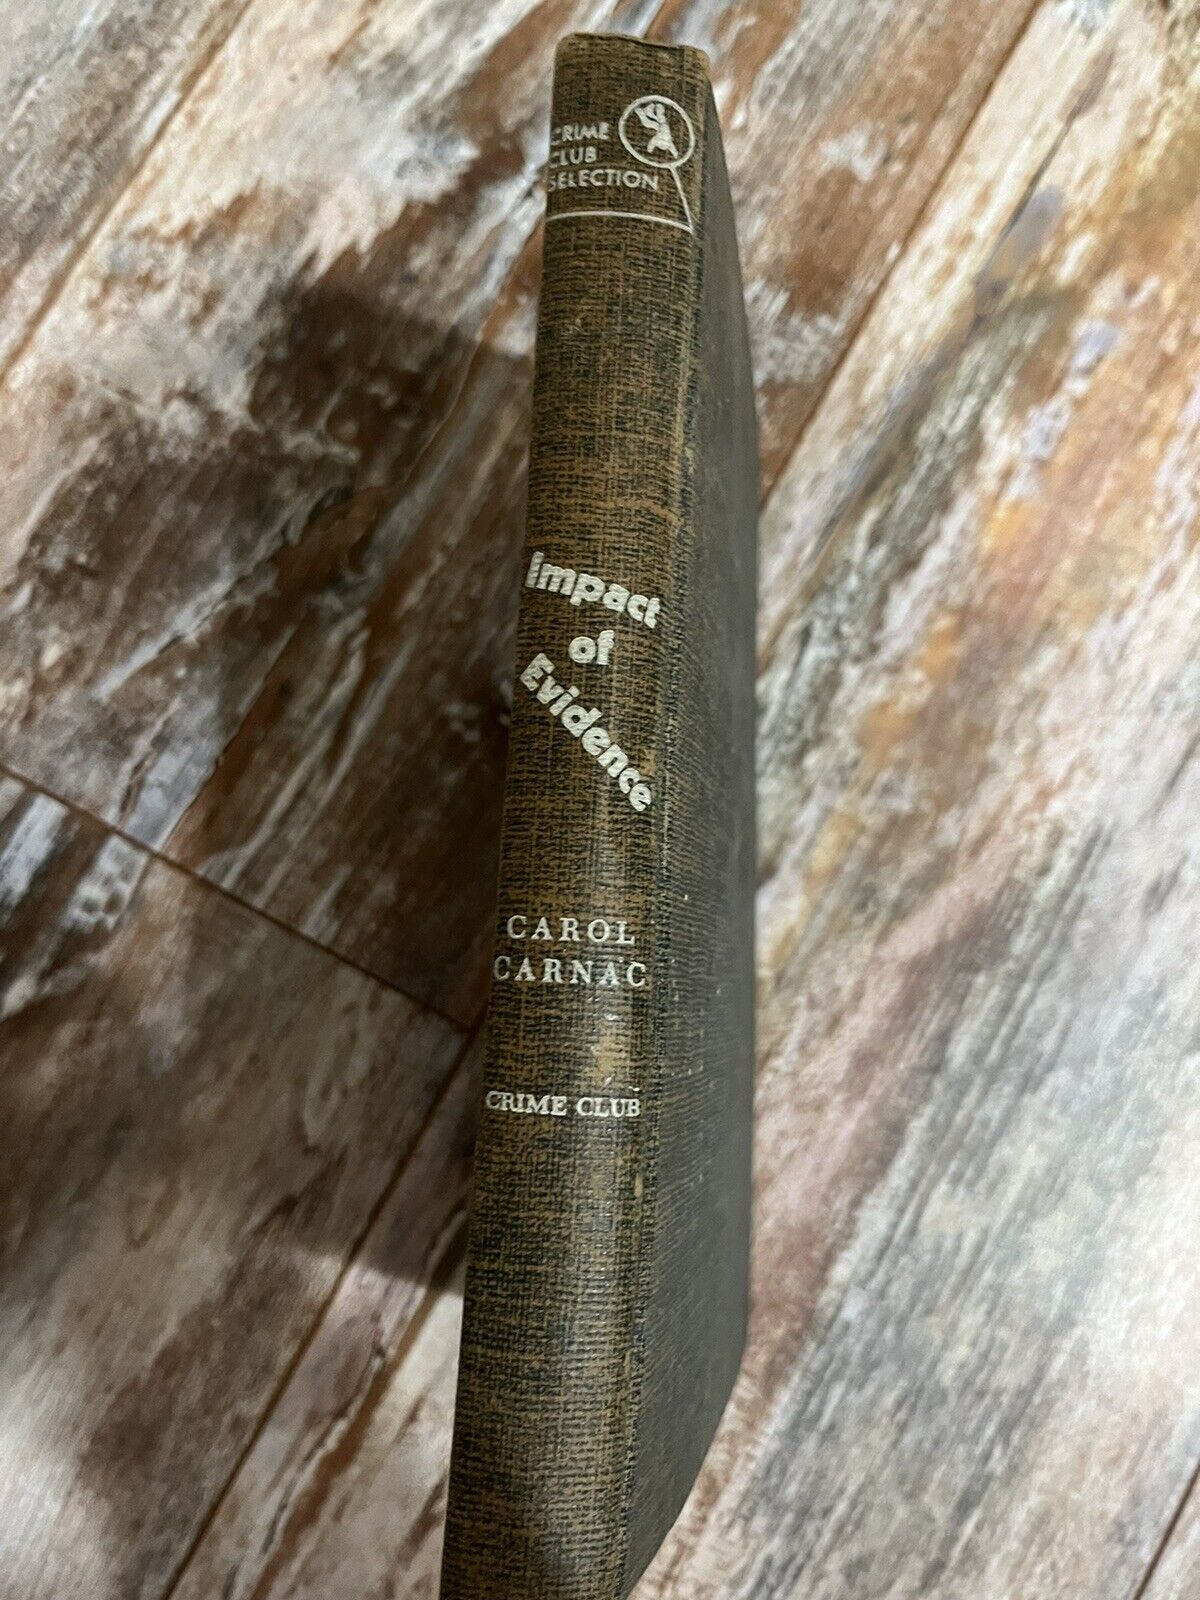 Impact of Evidence 1954 VINTAGE Hardcover Book - FIRST EDITION - By Carol Carnac